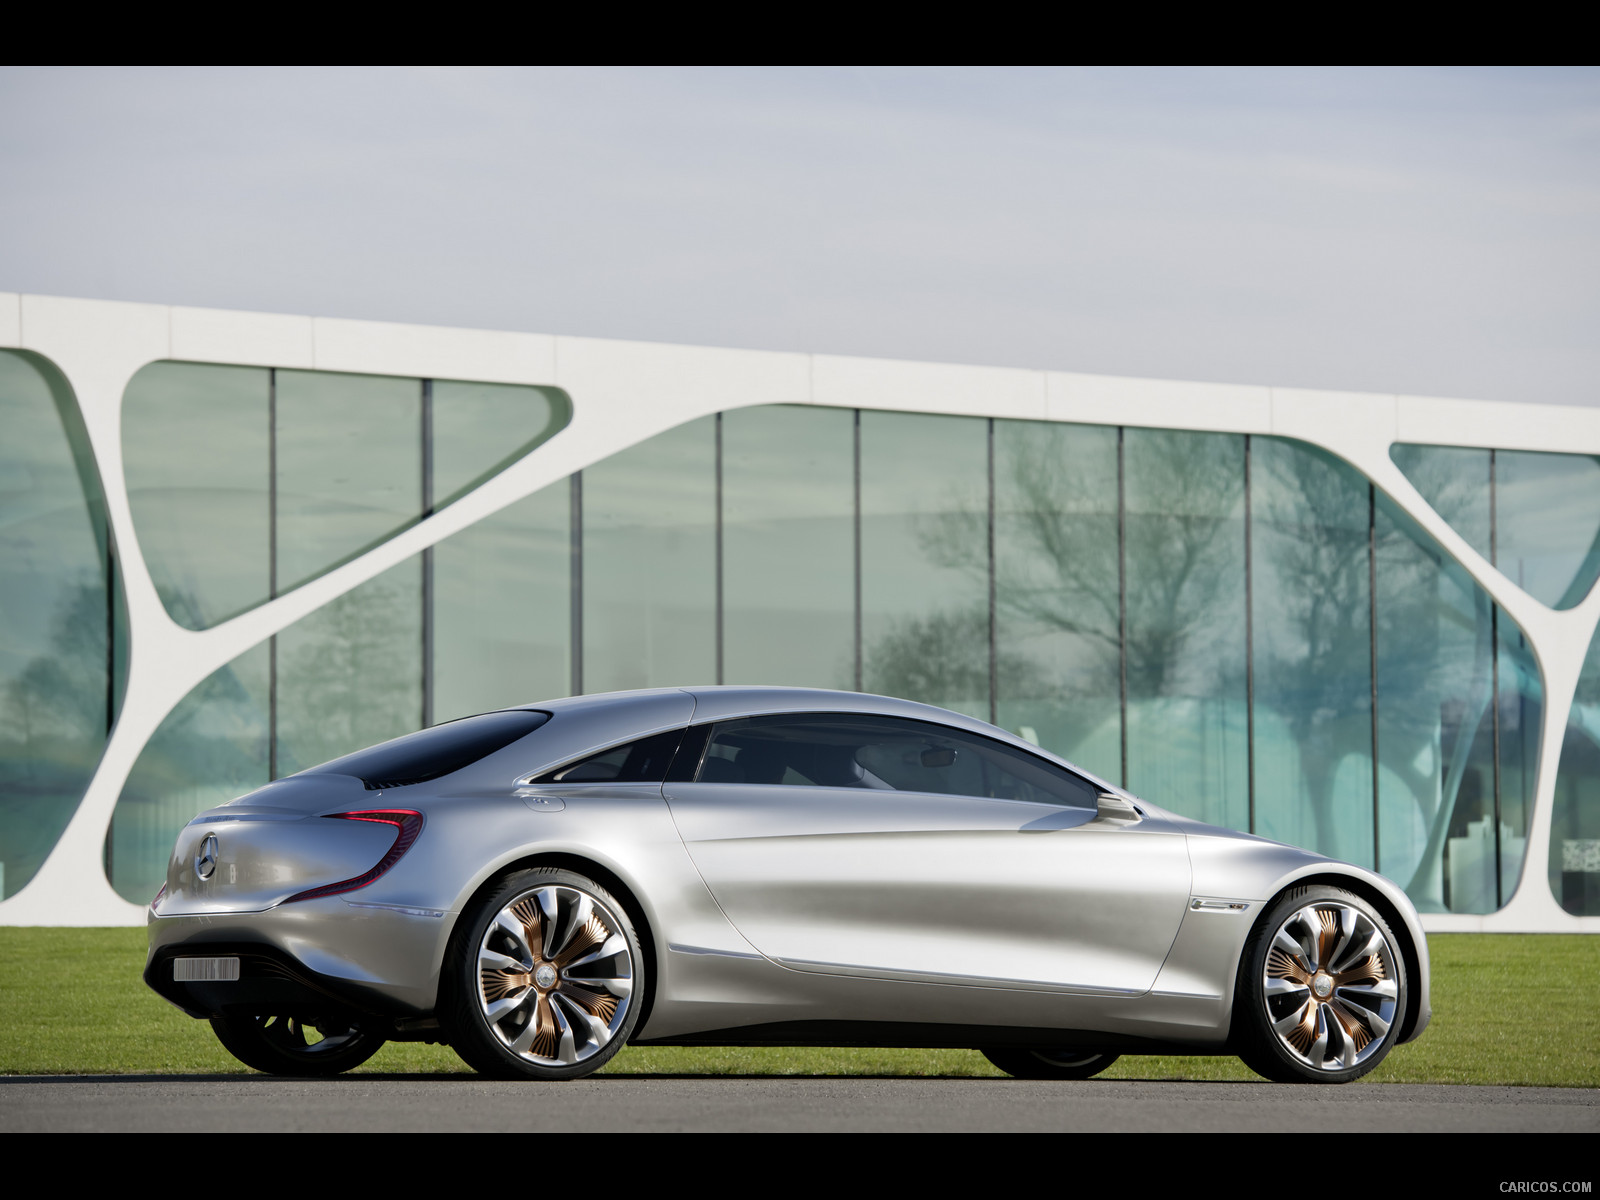 Mercedes-Benz F 125 Concept  - Side, #4 of 63